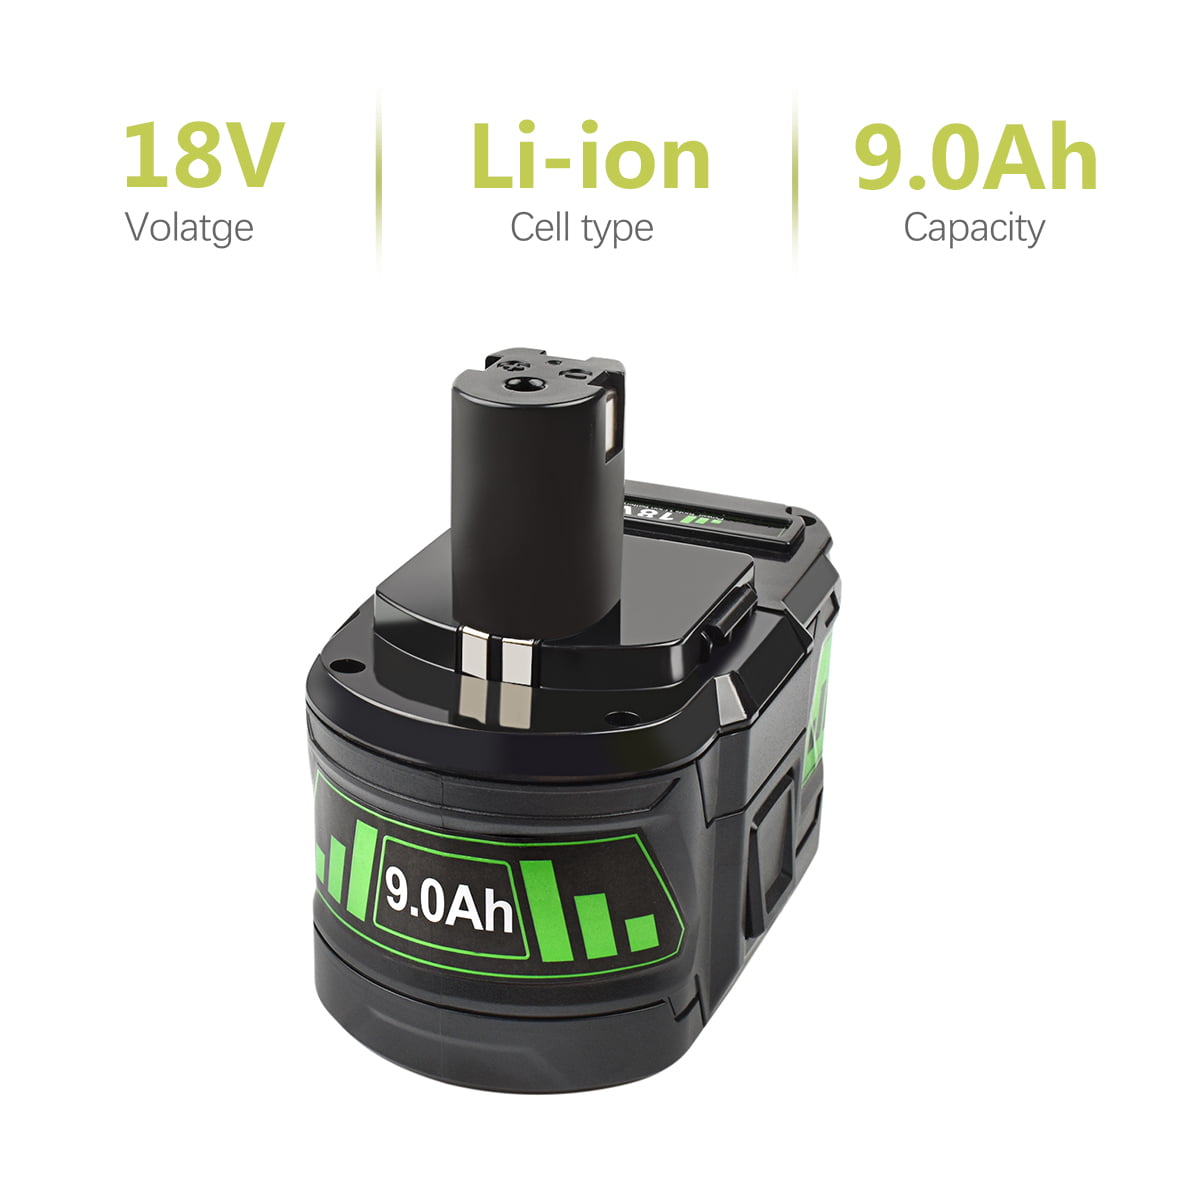 18V 6.0Ah P108 Battery for Ryobi One Plus Lithium ion Battery P102 P103 P104 P105 P107 P108 P109 P122 Cordless Power Tools